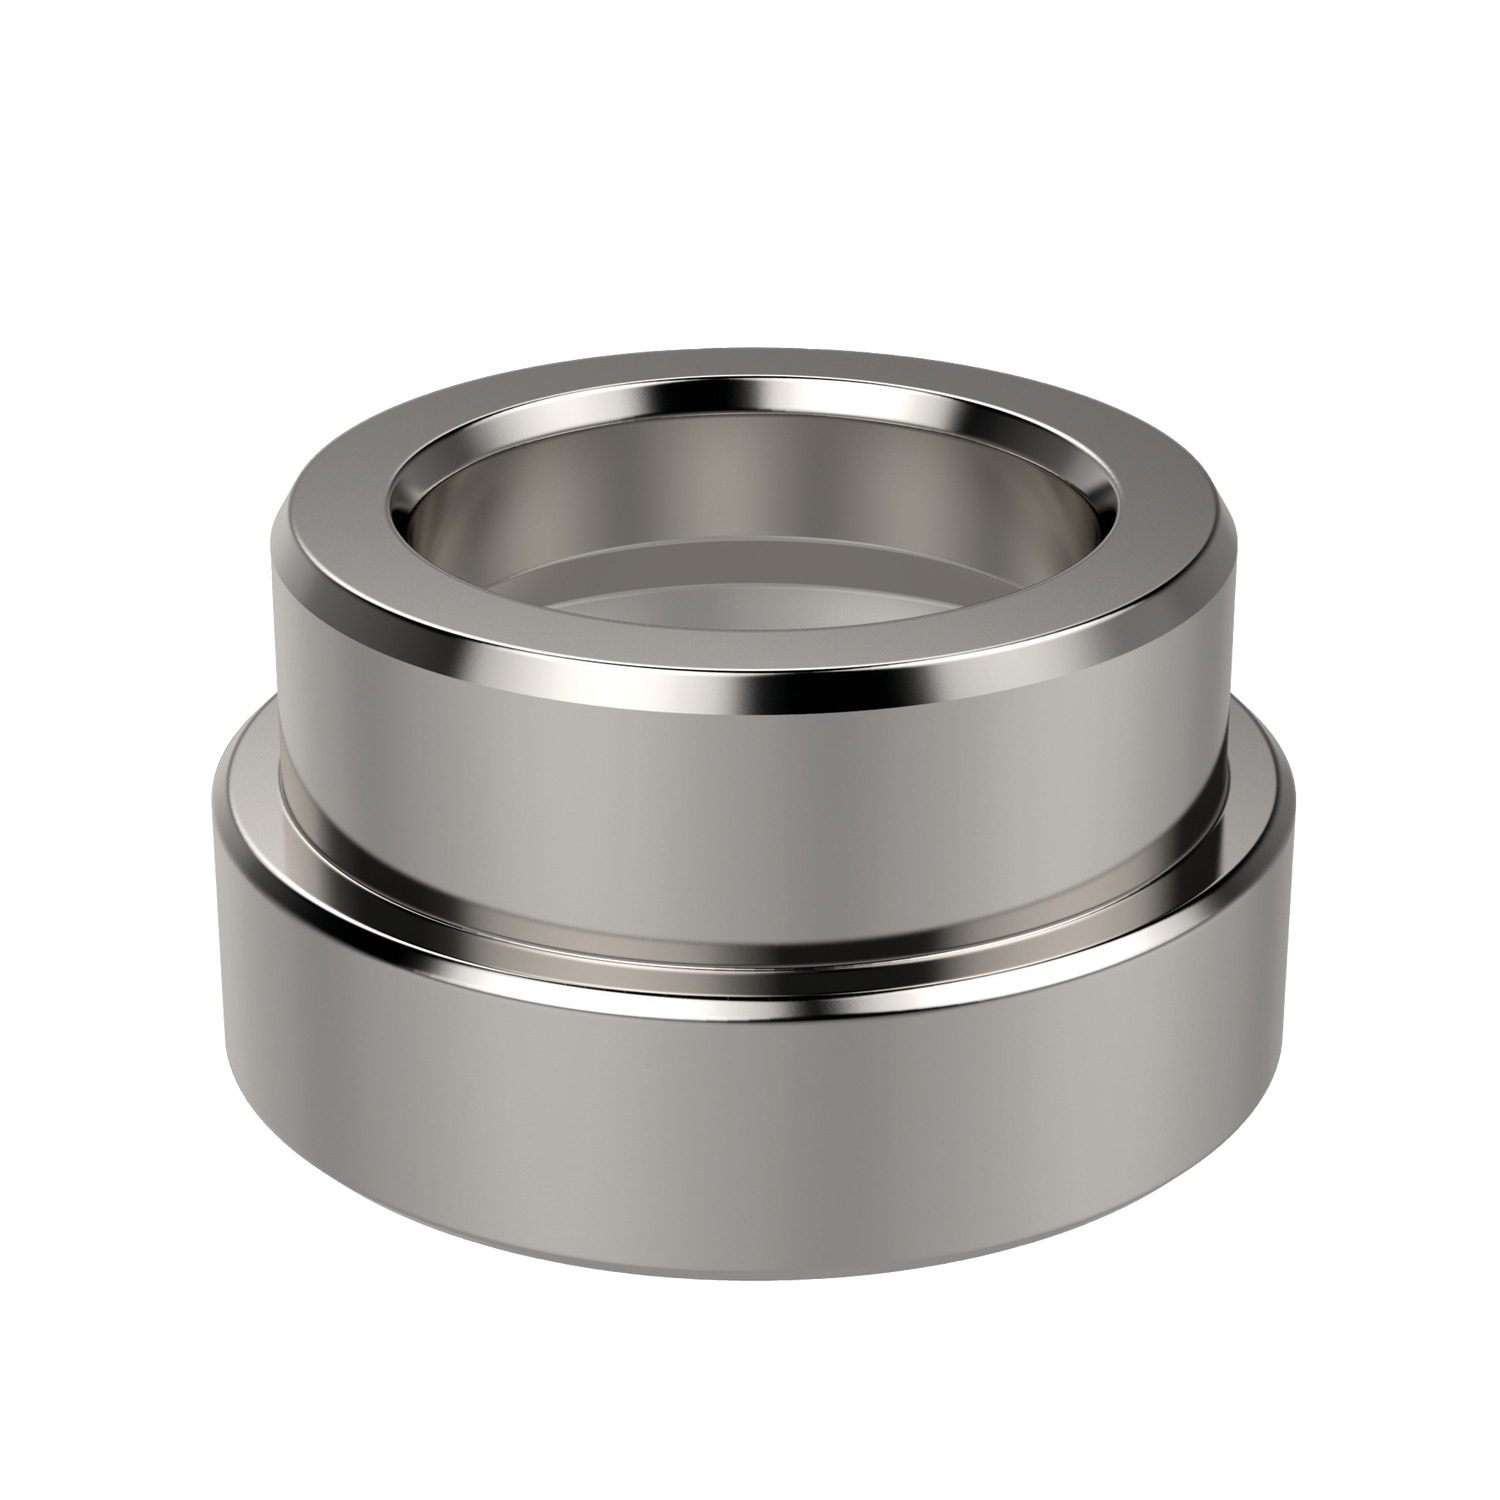 Product 12093, Locating Bushings for positioning clamping pins 12090 - press fit / 